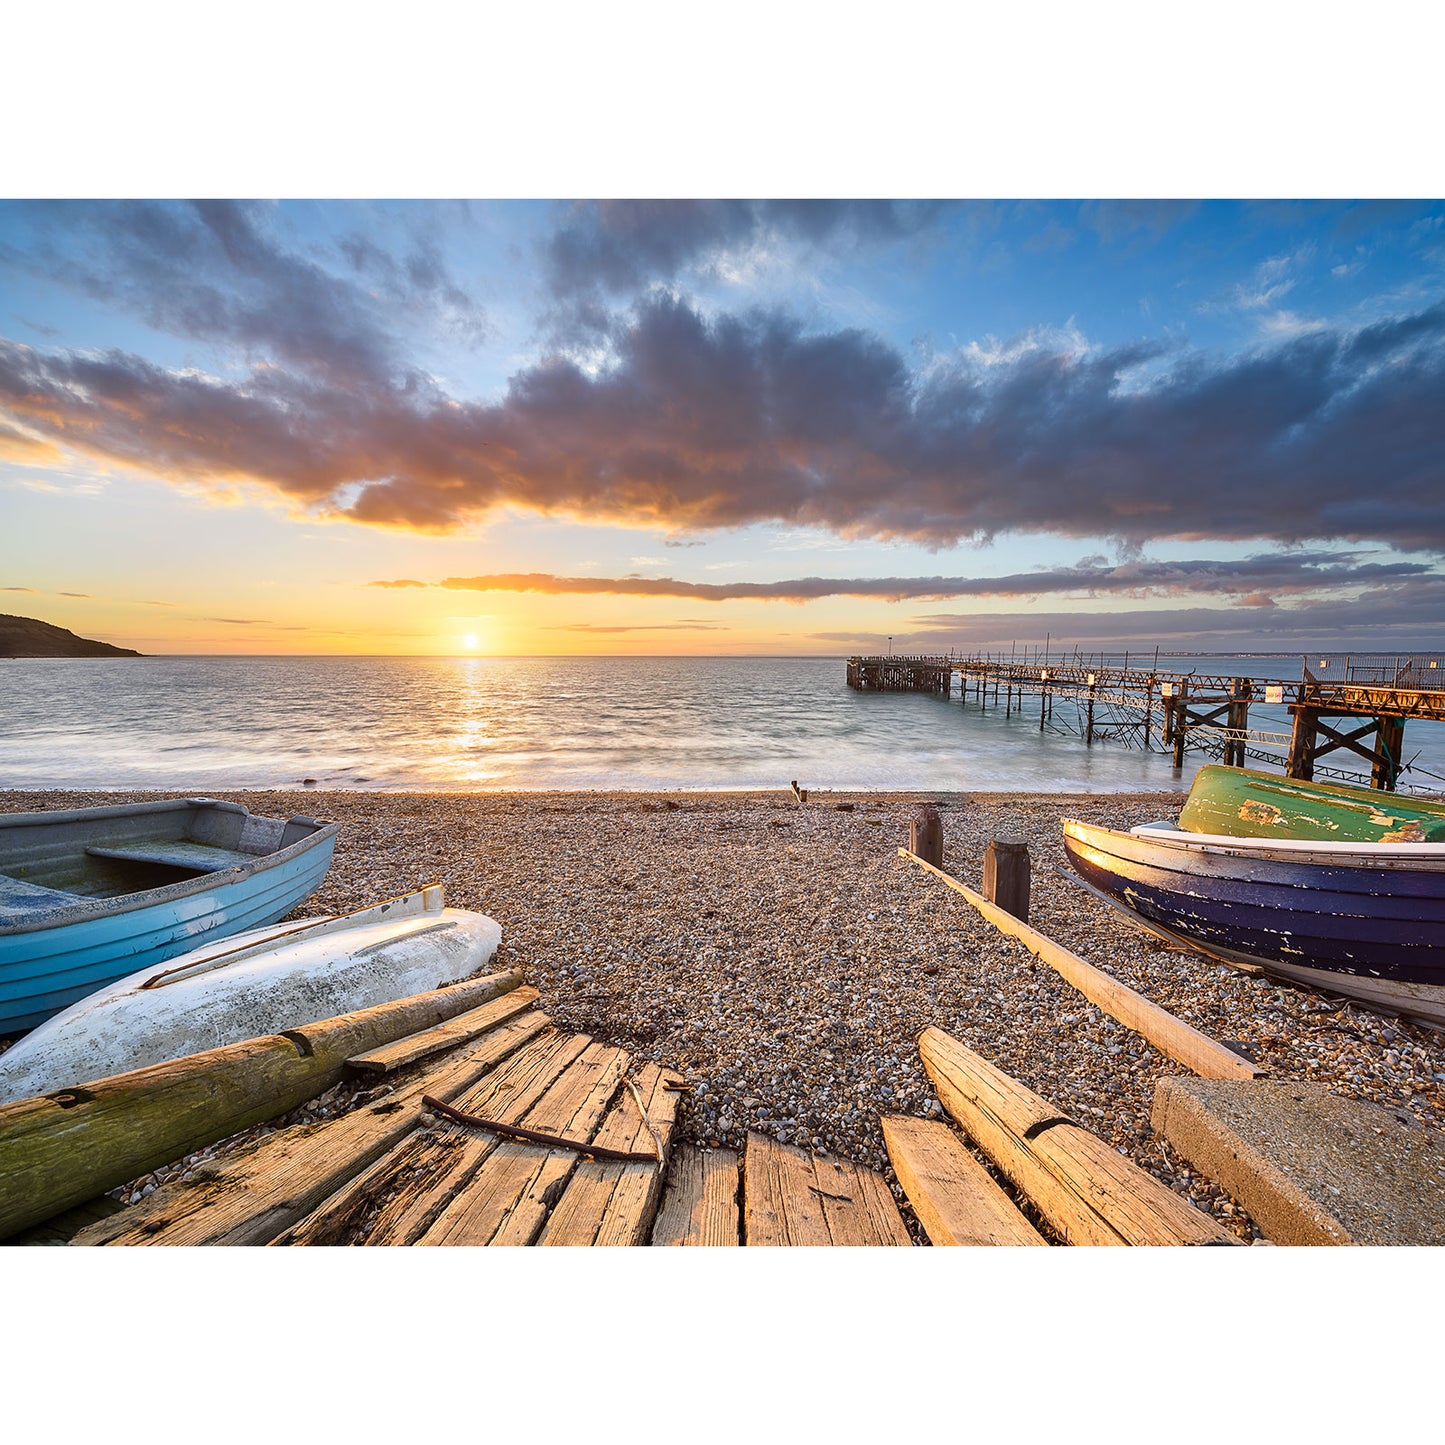 Totland - Available Light Photography